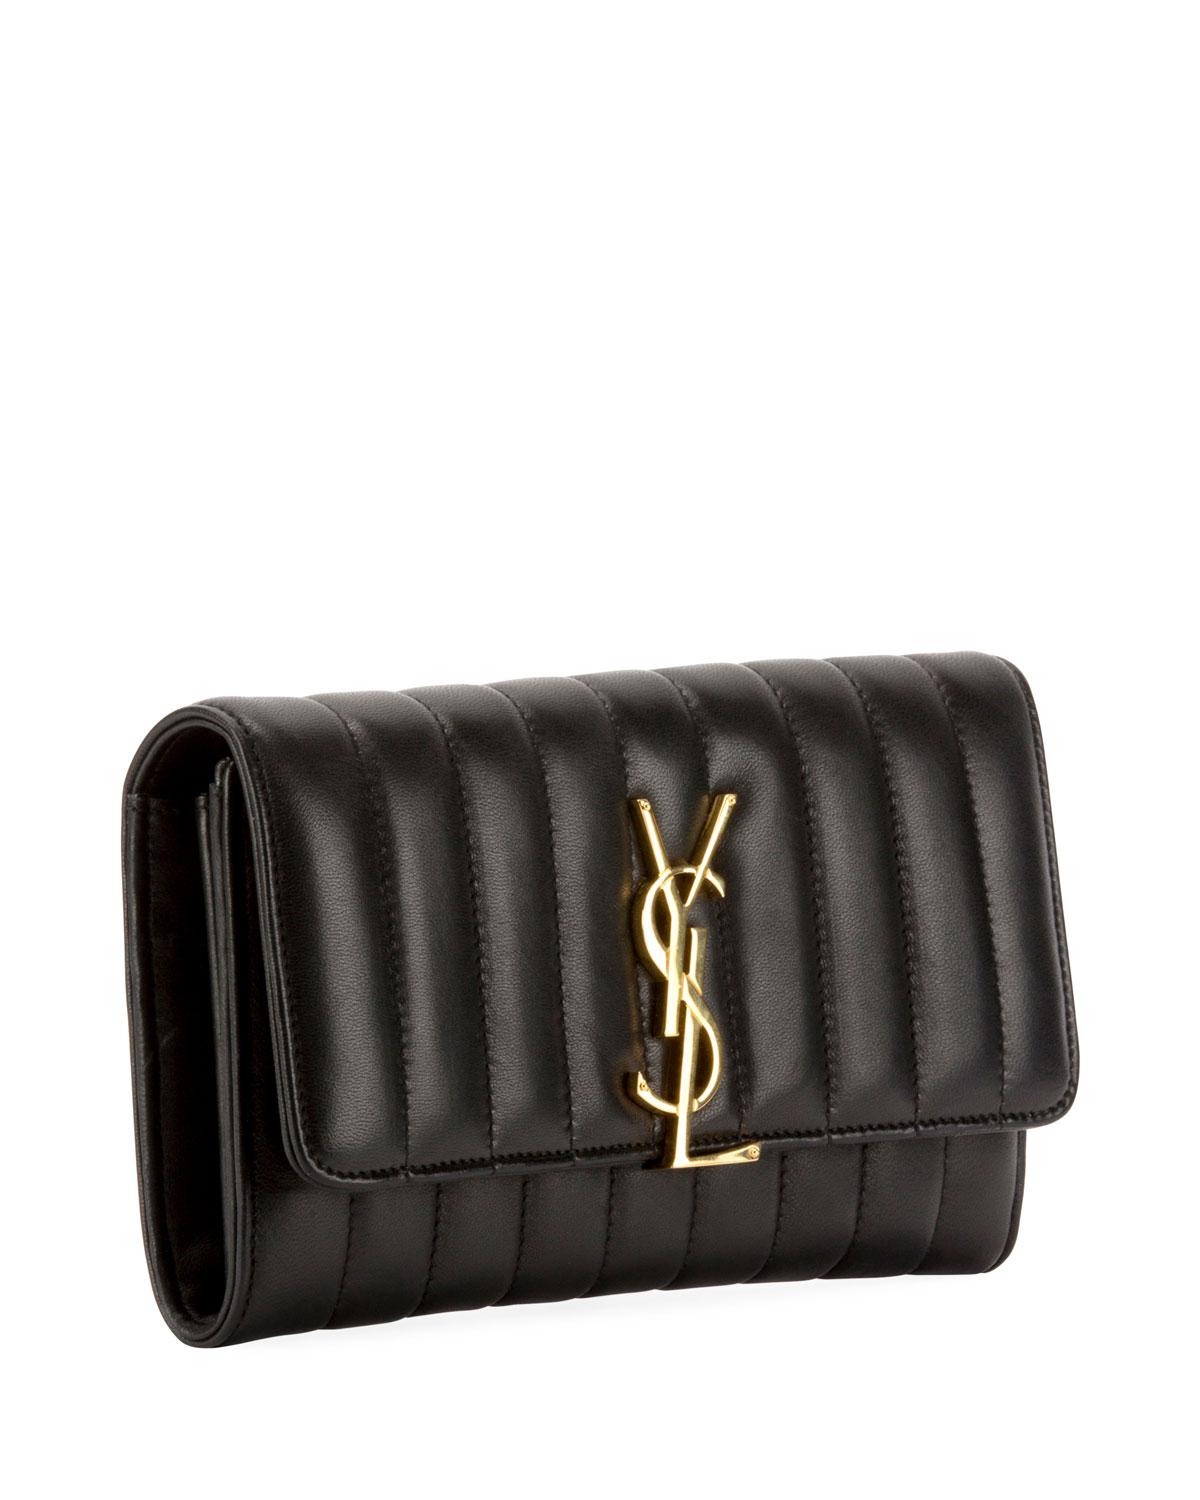 Saint Laurent Vicky Monogram Ysl Quilted Leather Continental Organizer Wallet in Black - Lyst